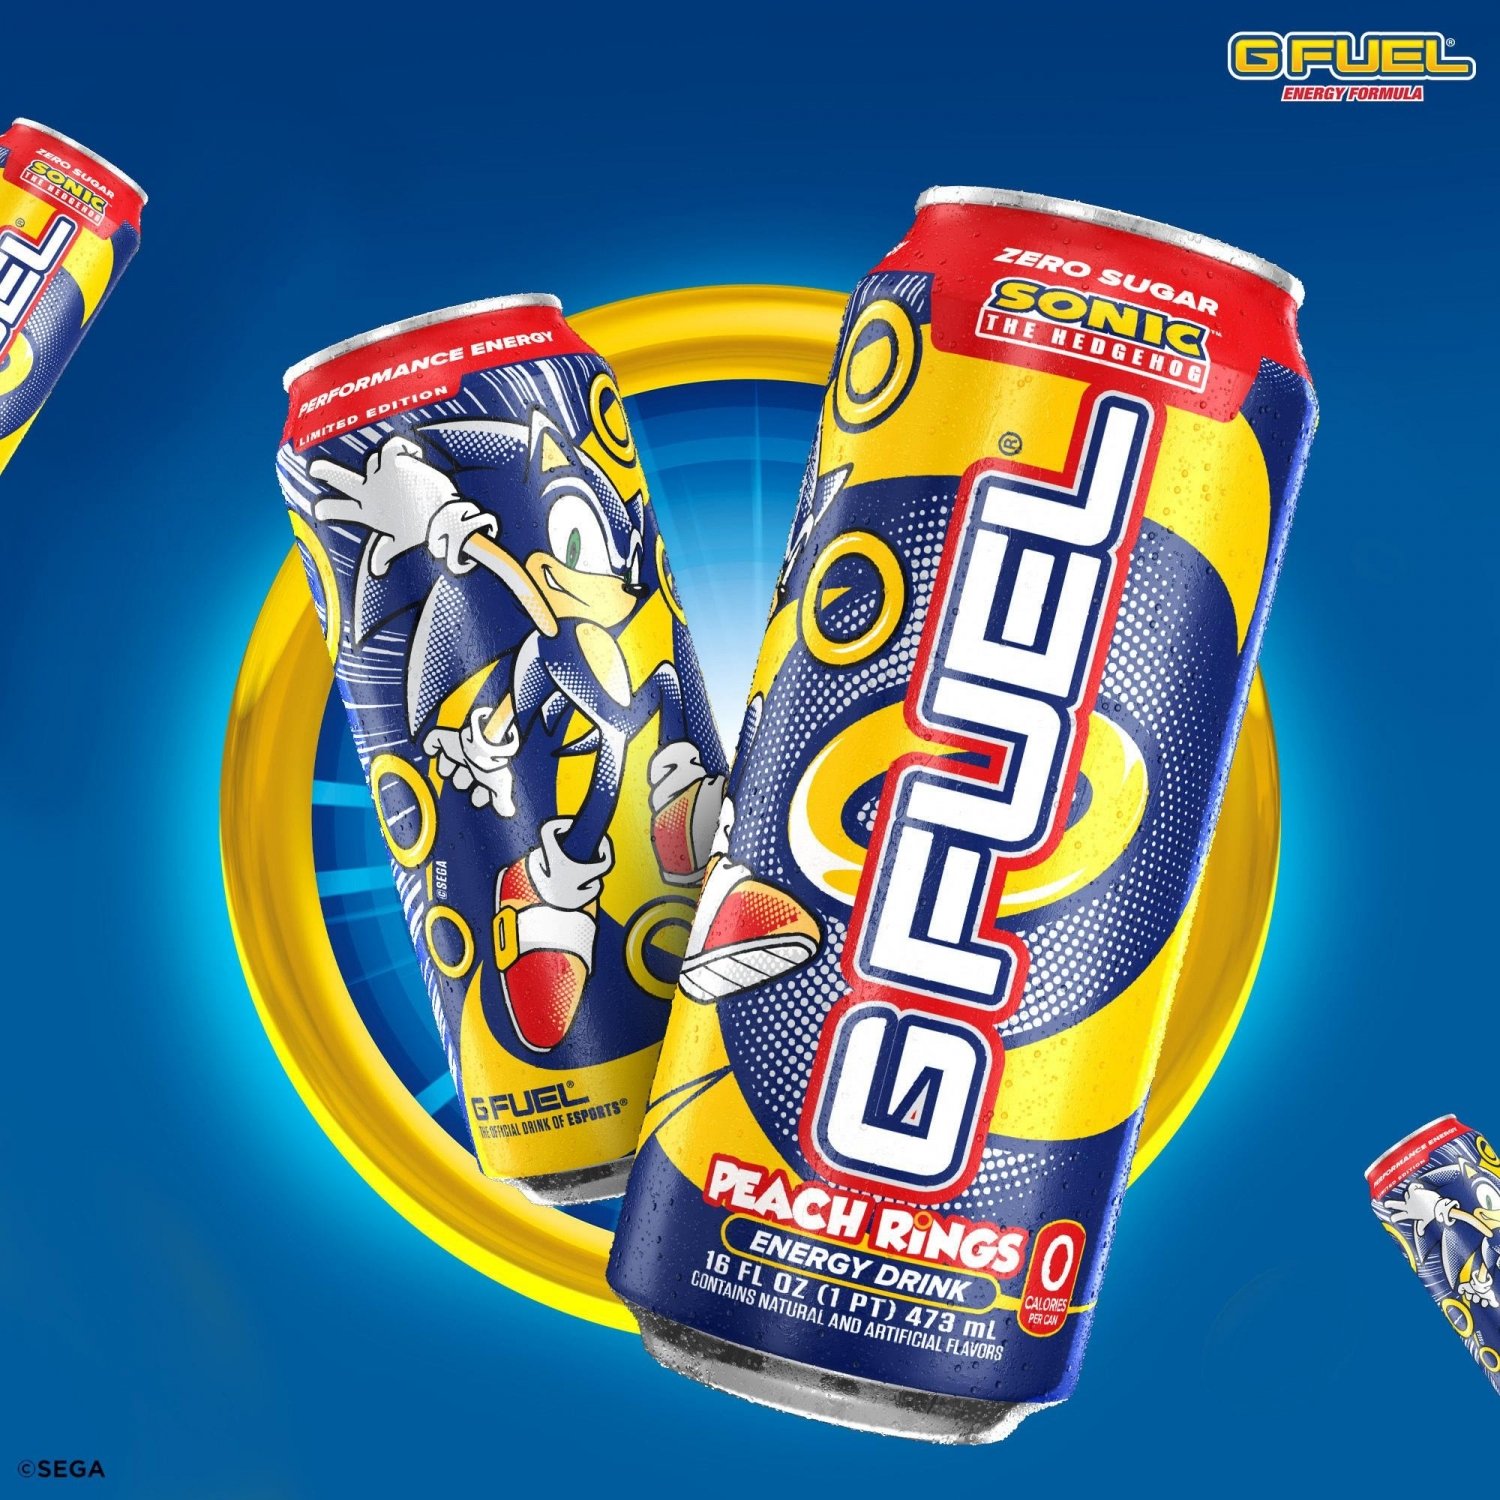 Sonic The Hedgehog's new G FUEL energy drink makes you go FAST